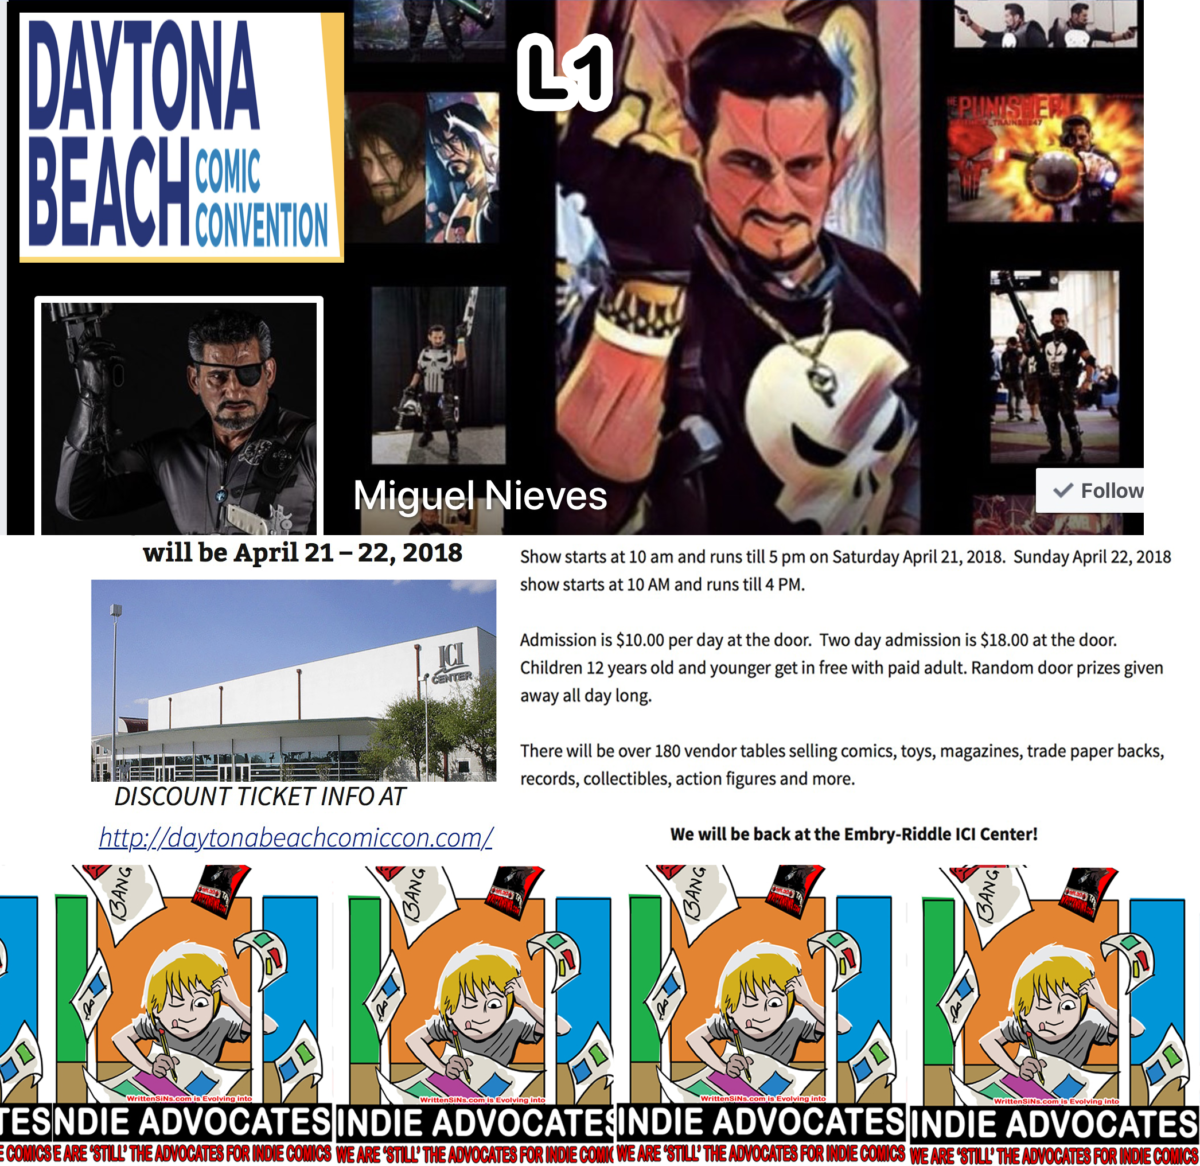 COMIC CON HIGHWAY EXITING with COSPLAYING  in FLORIDA::  Daytona Beach Comic Convention Cosplaying will happen thanks to  Miguel Nieves April 21 – 22, 2018  .  .